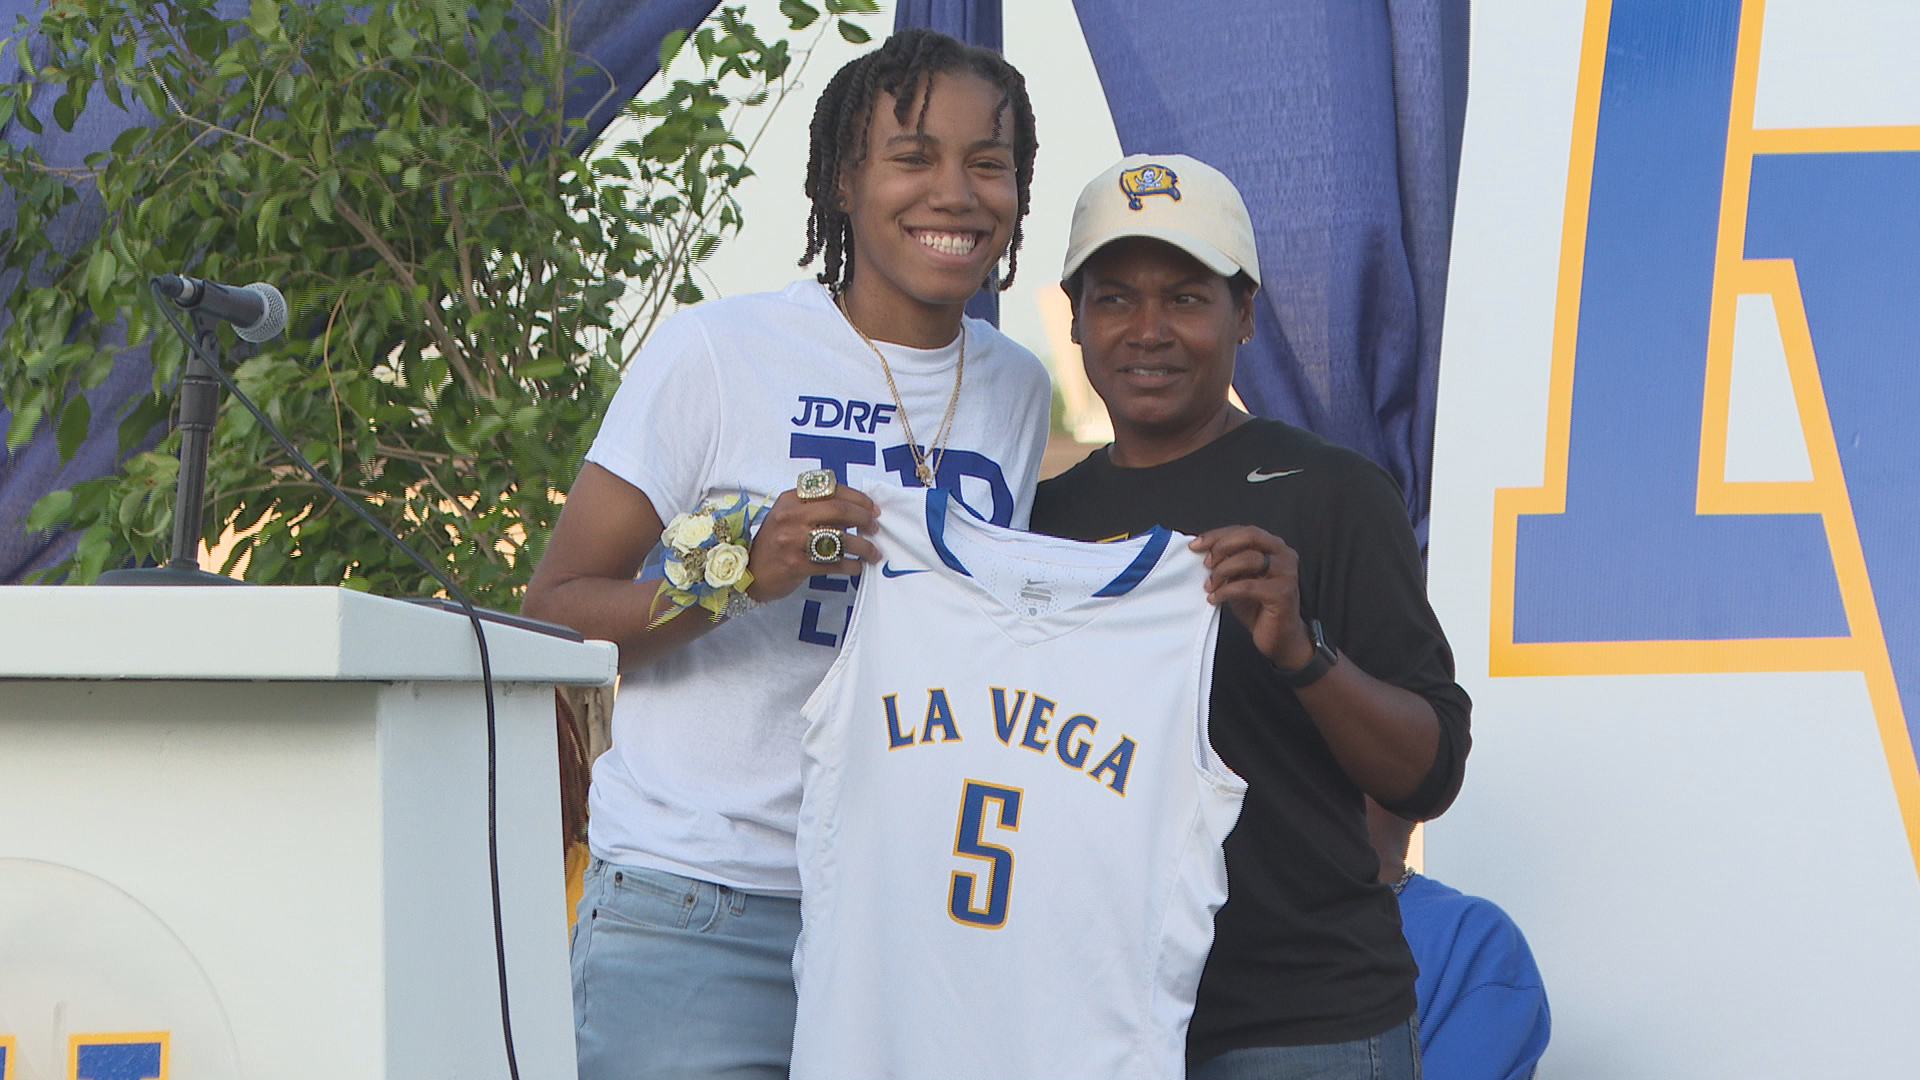 During La Vega High School's state championship parade for its track team, the school's former basketball star Juicy Landrum had her jersey retired.